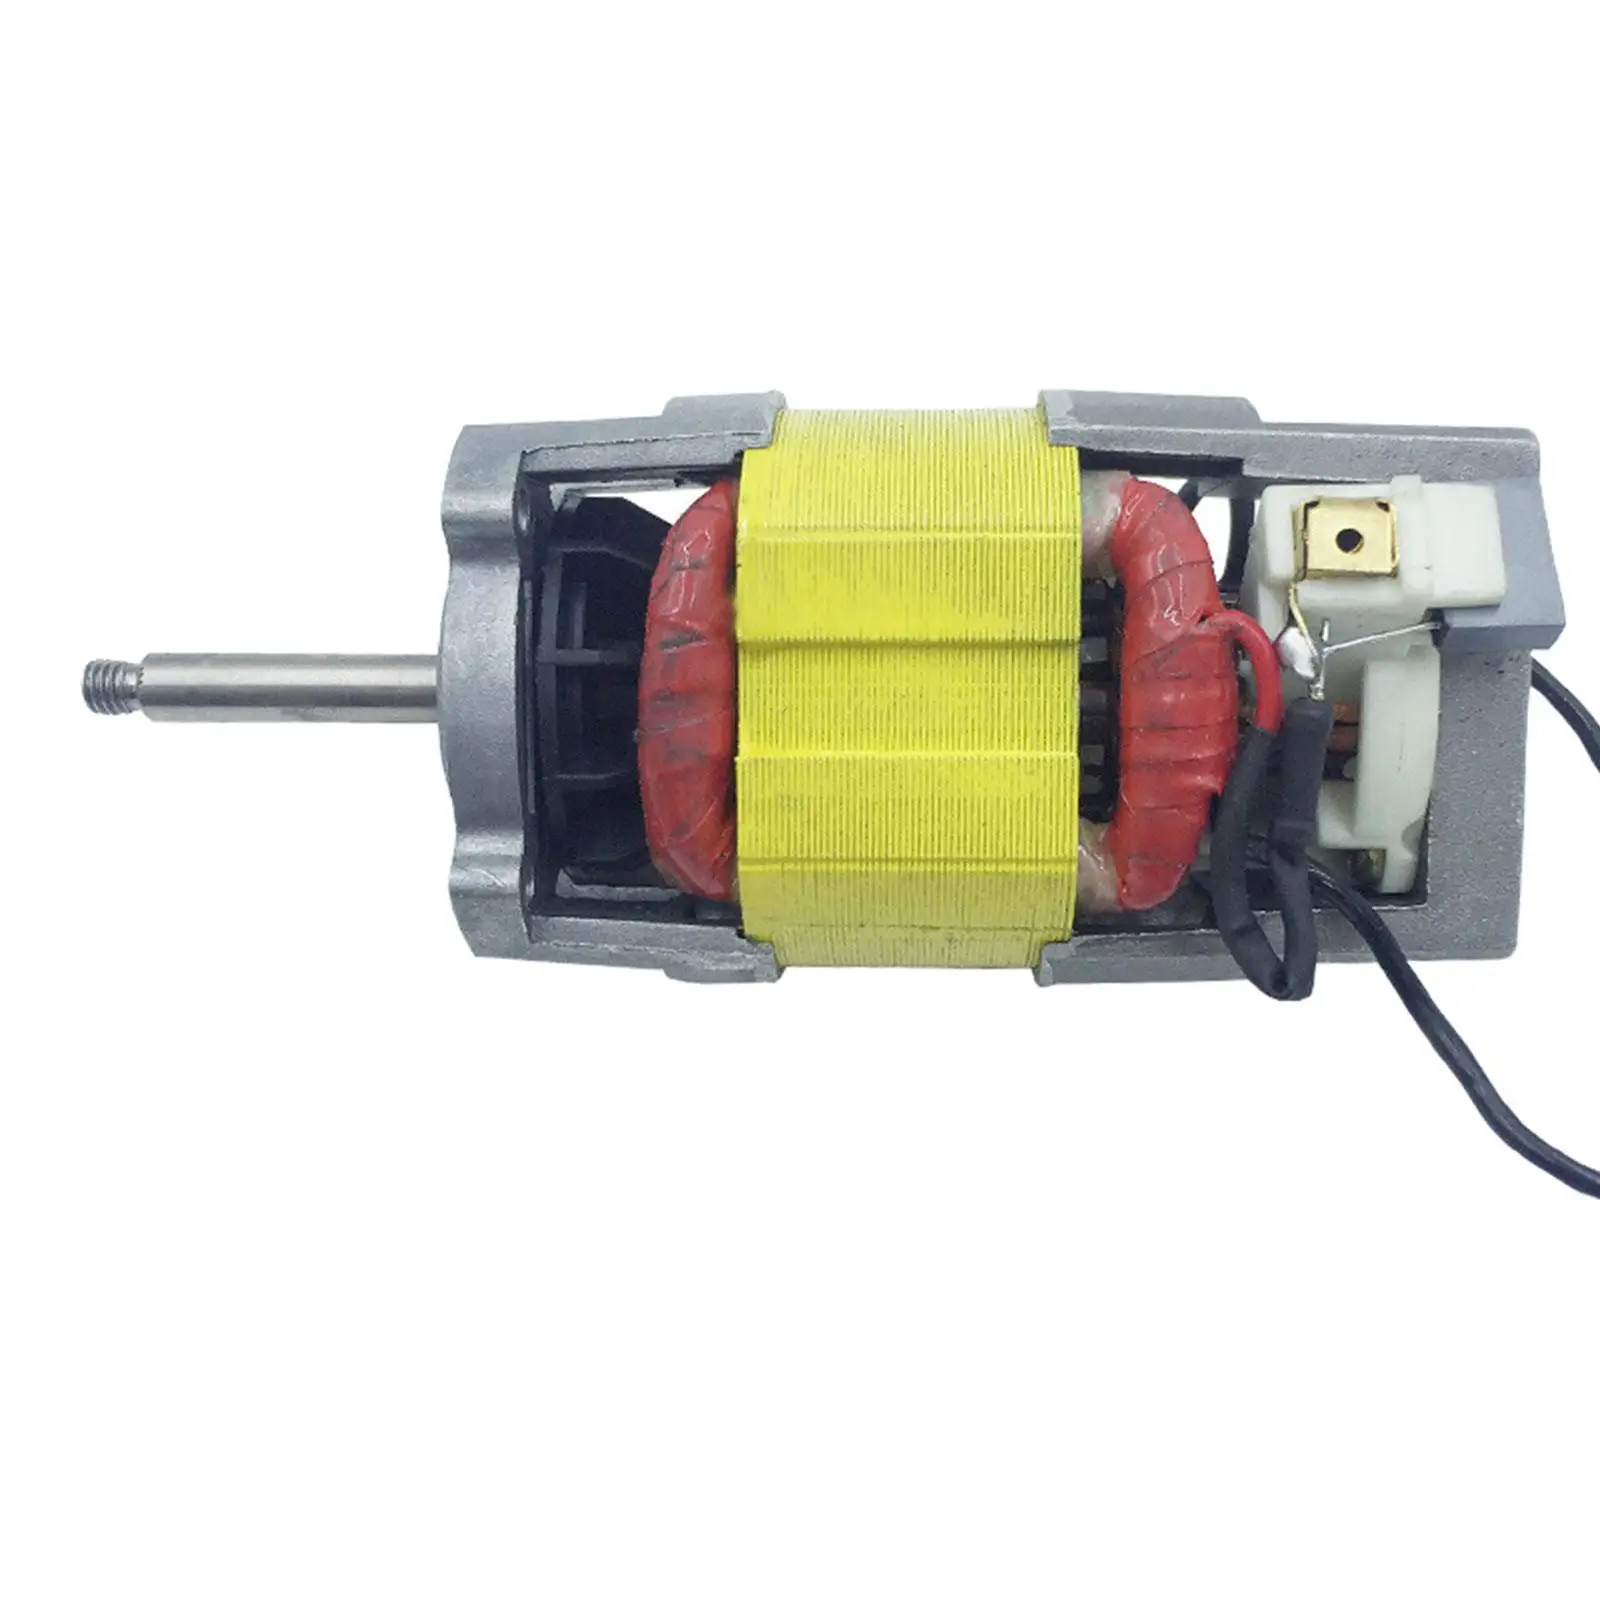 Hot Air Motor for Crafts Low Temperature Rising Low Calorific Value 50Hz High Speed Bearing Durable 1600W Electric Hot Air Motor